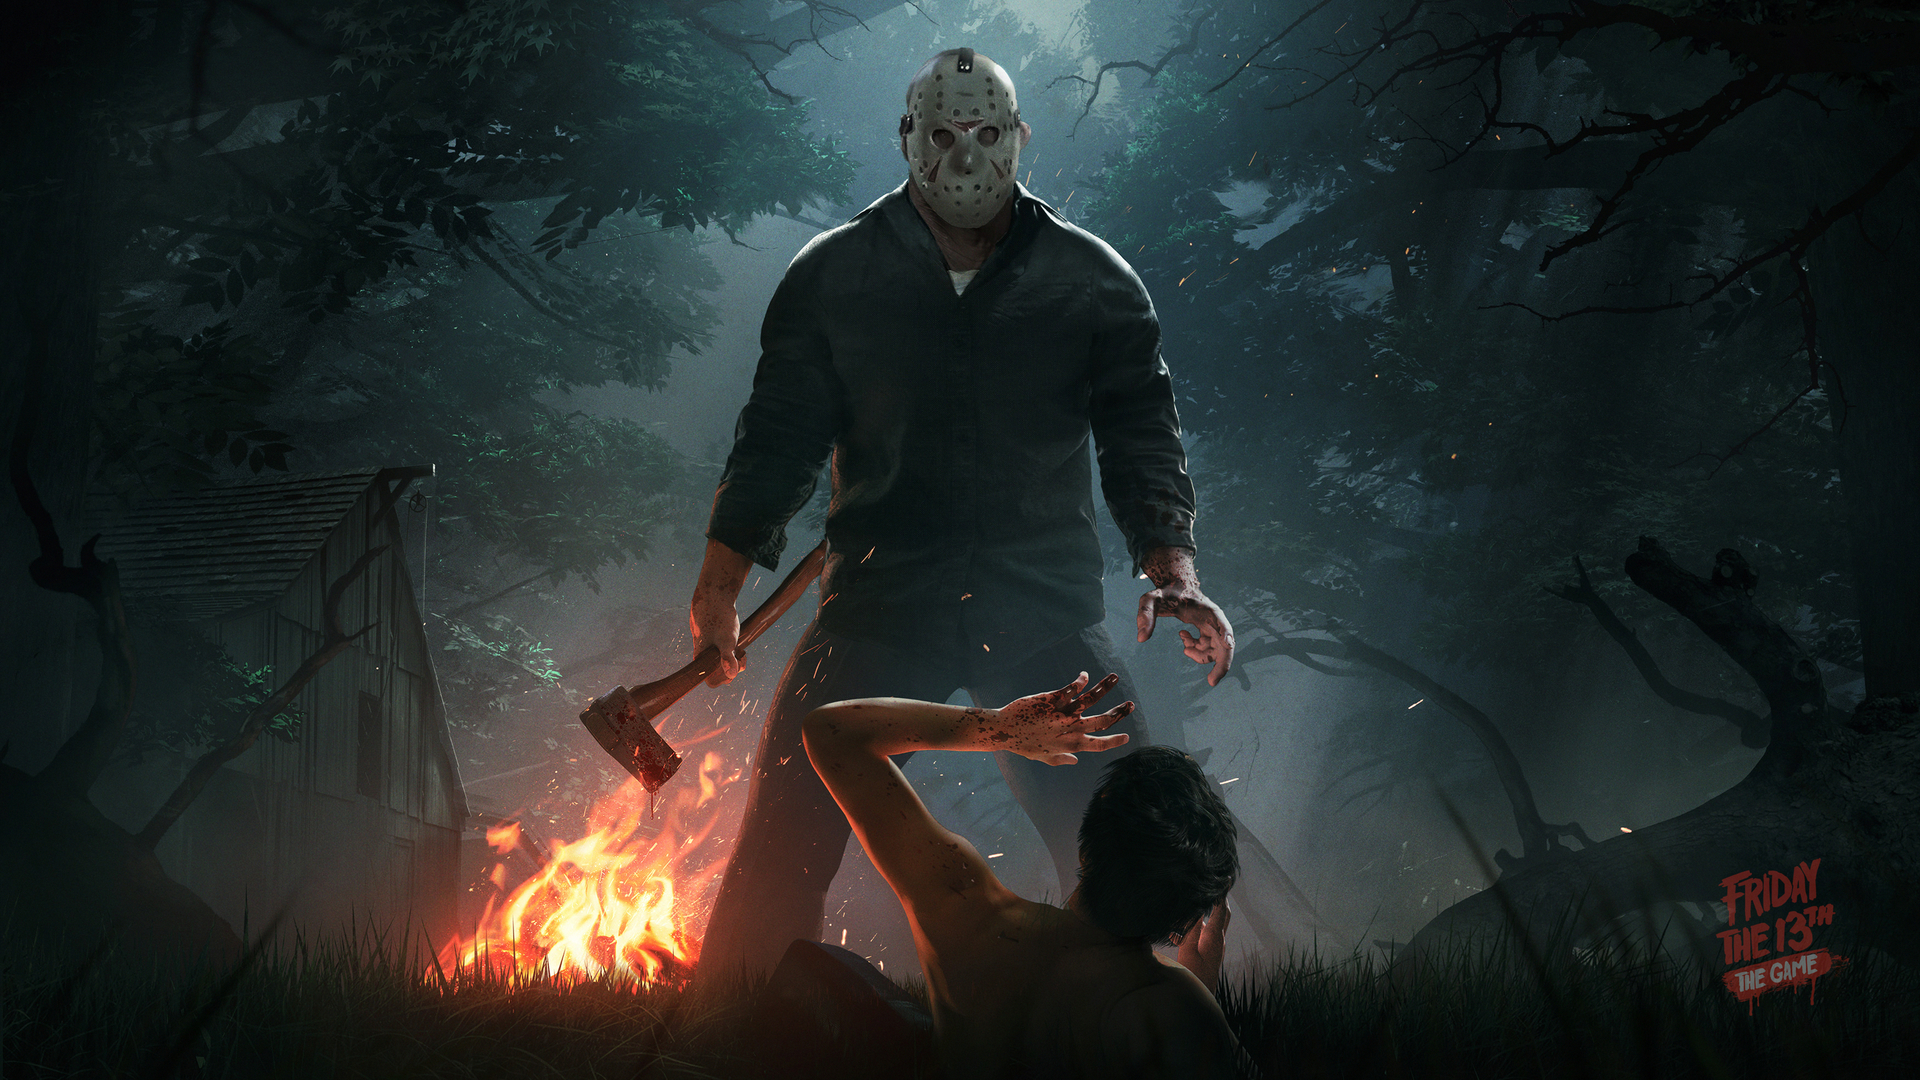 Friday The 13th The Game - HD Wallpaper 